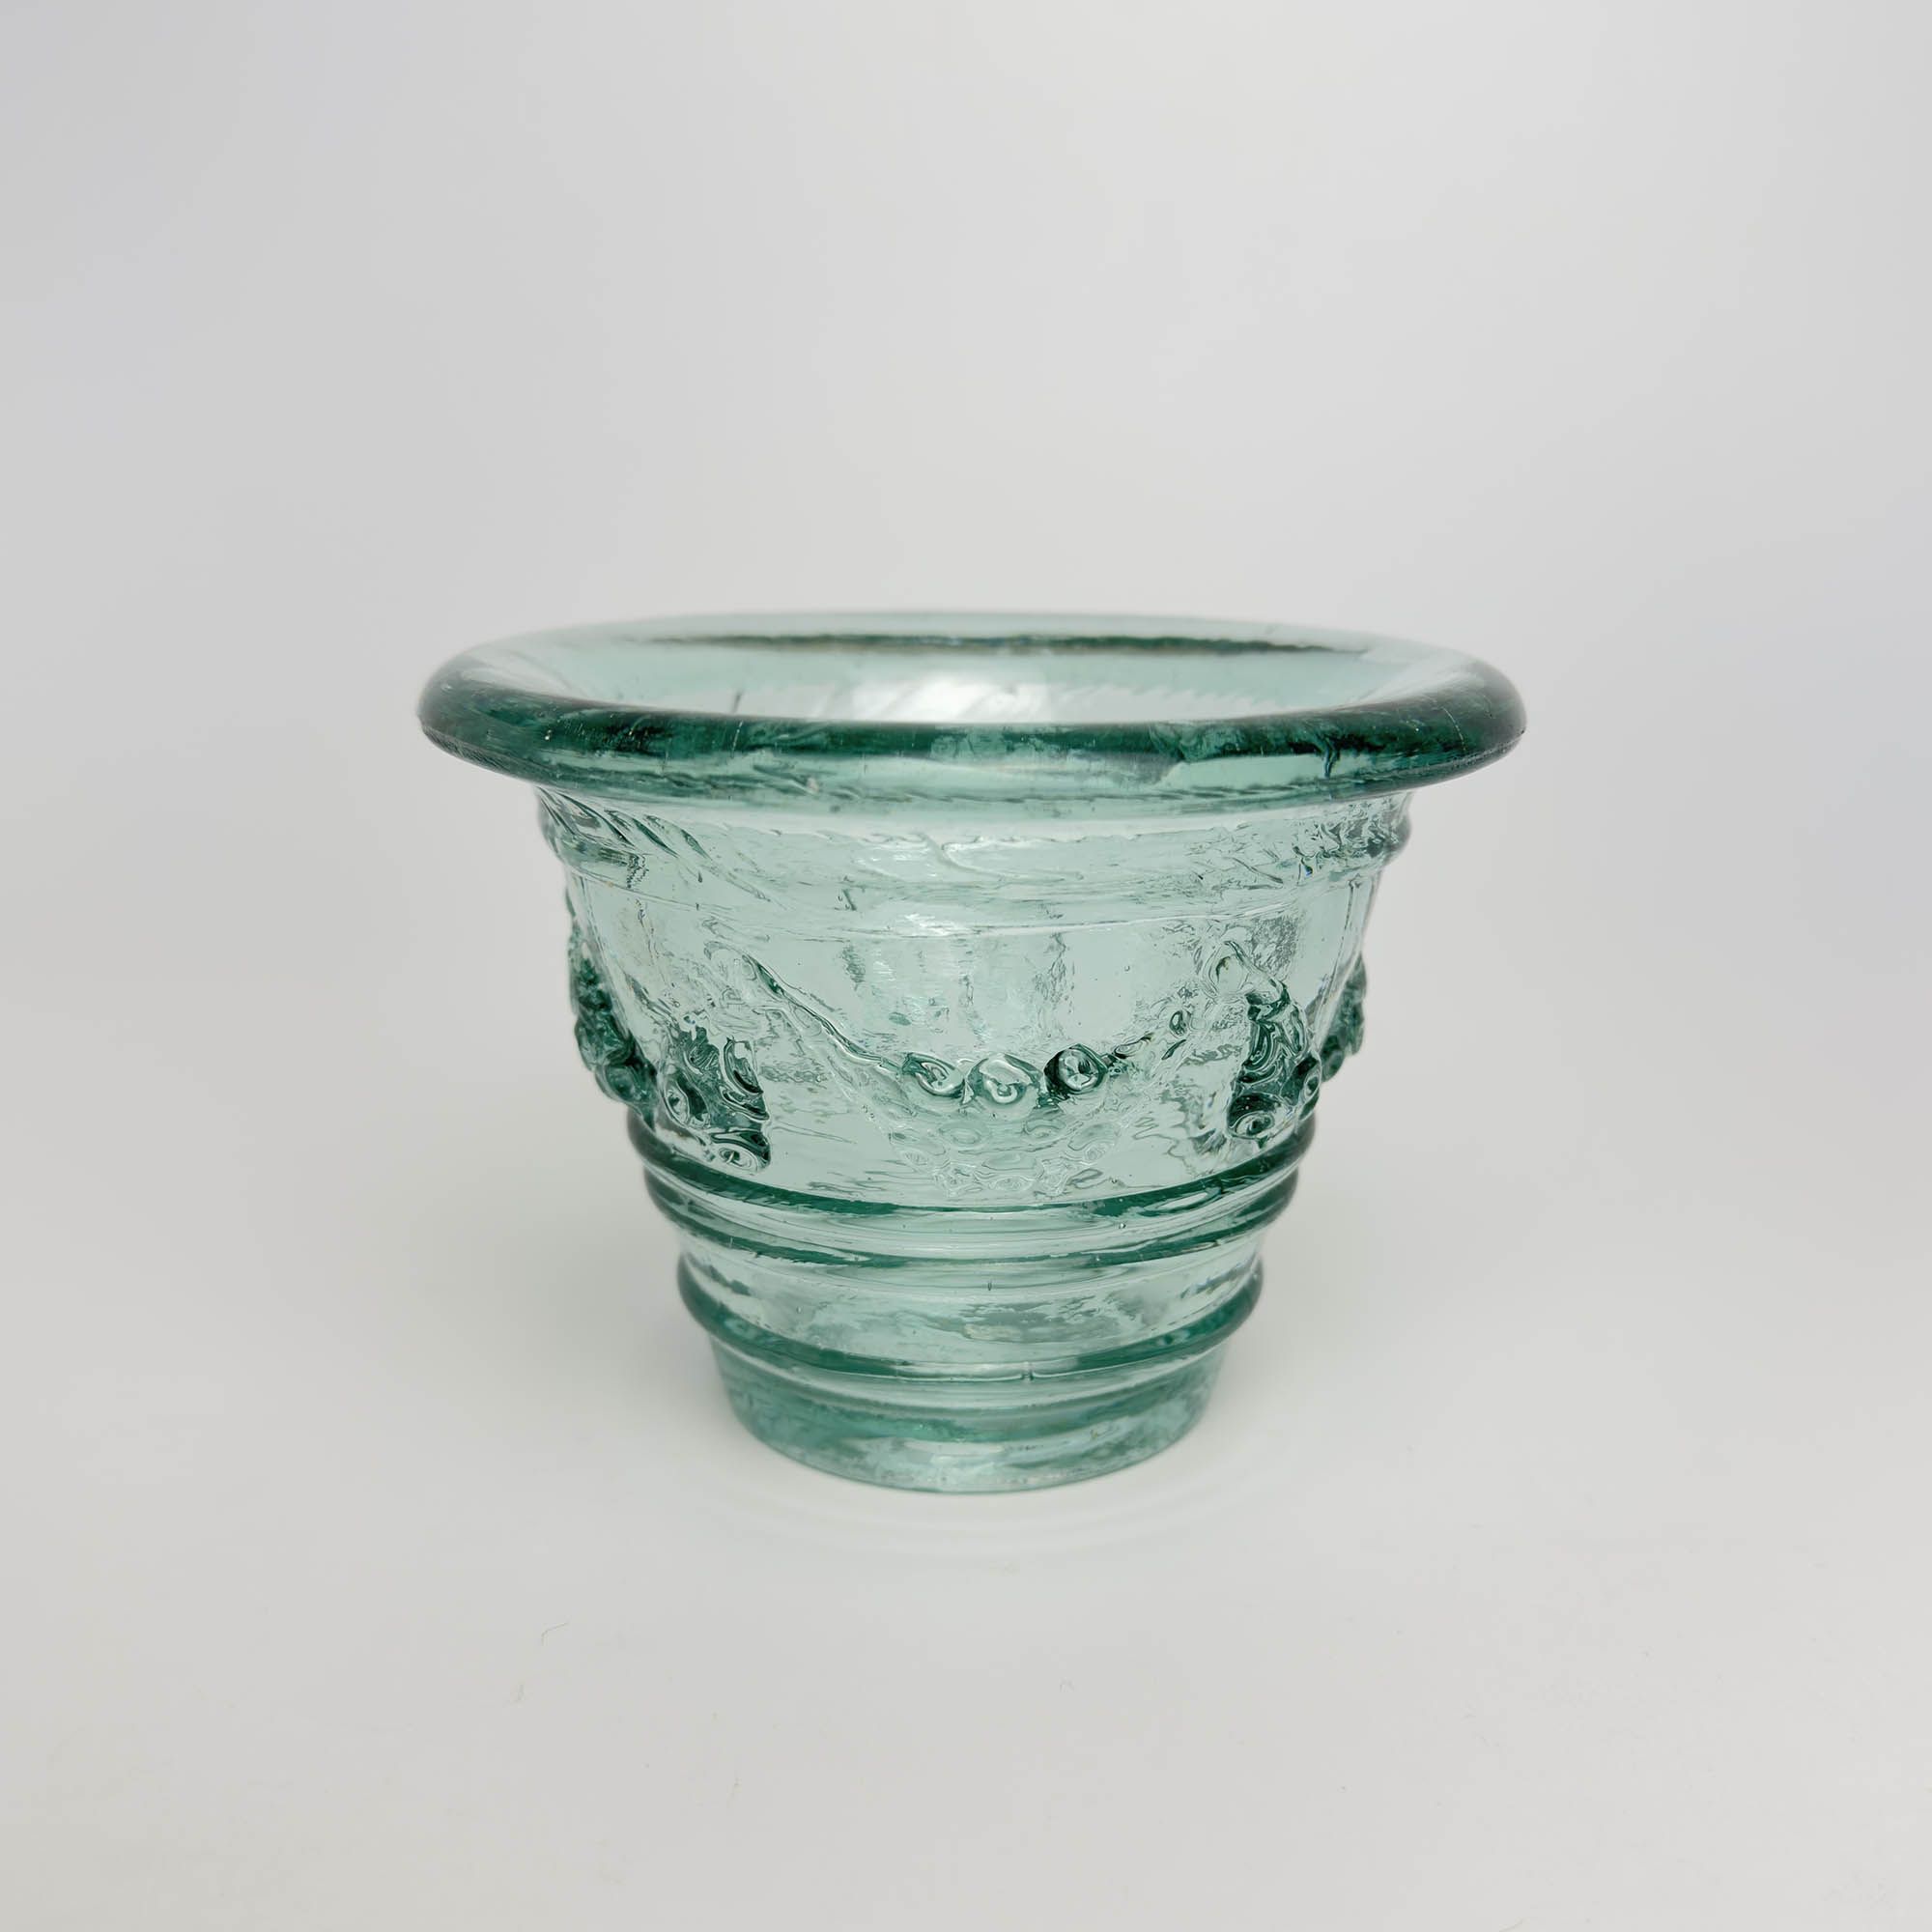 Vintage La Mediterranea Green Recycled Glass Candle Holder. Made in Spain.